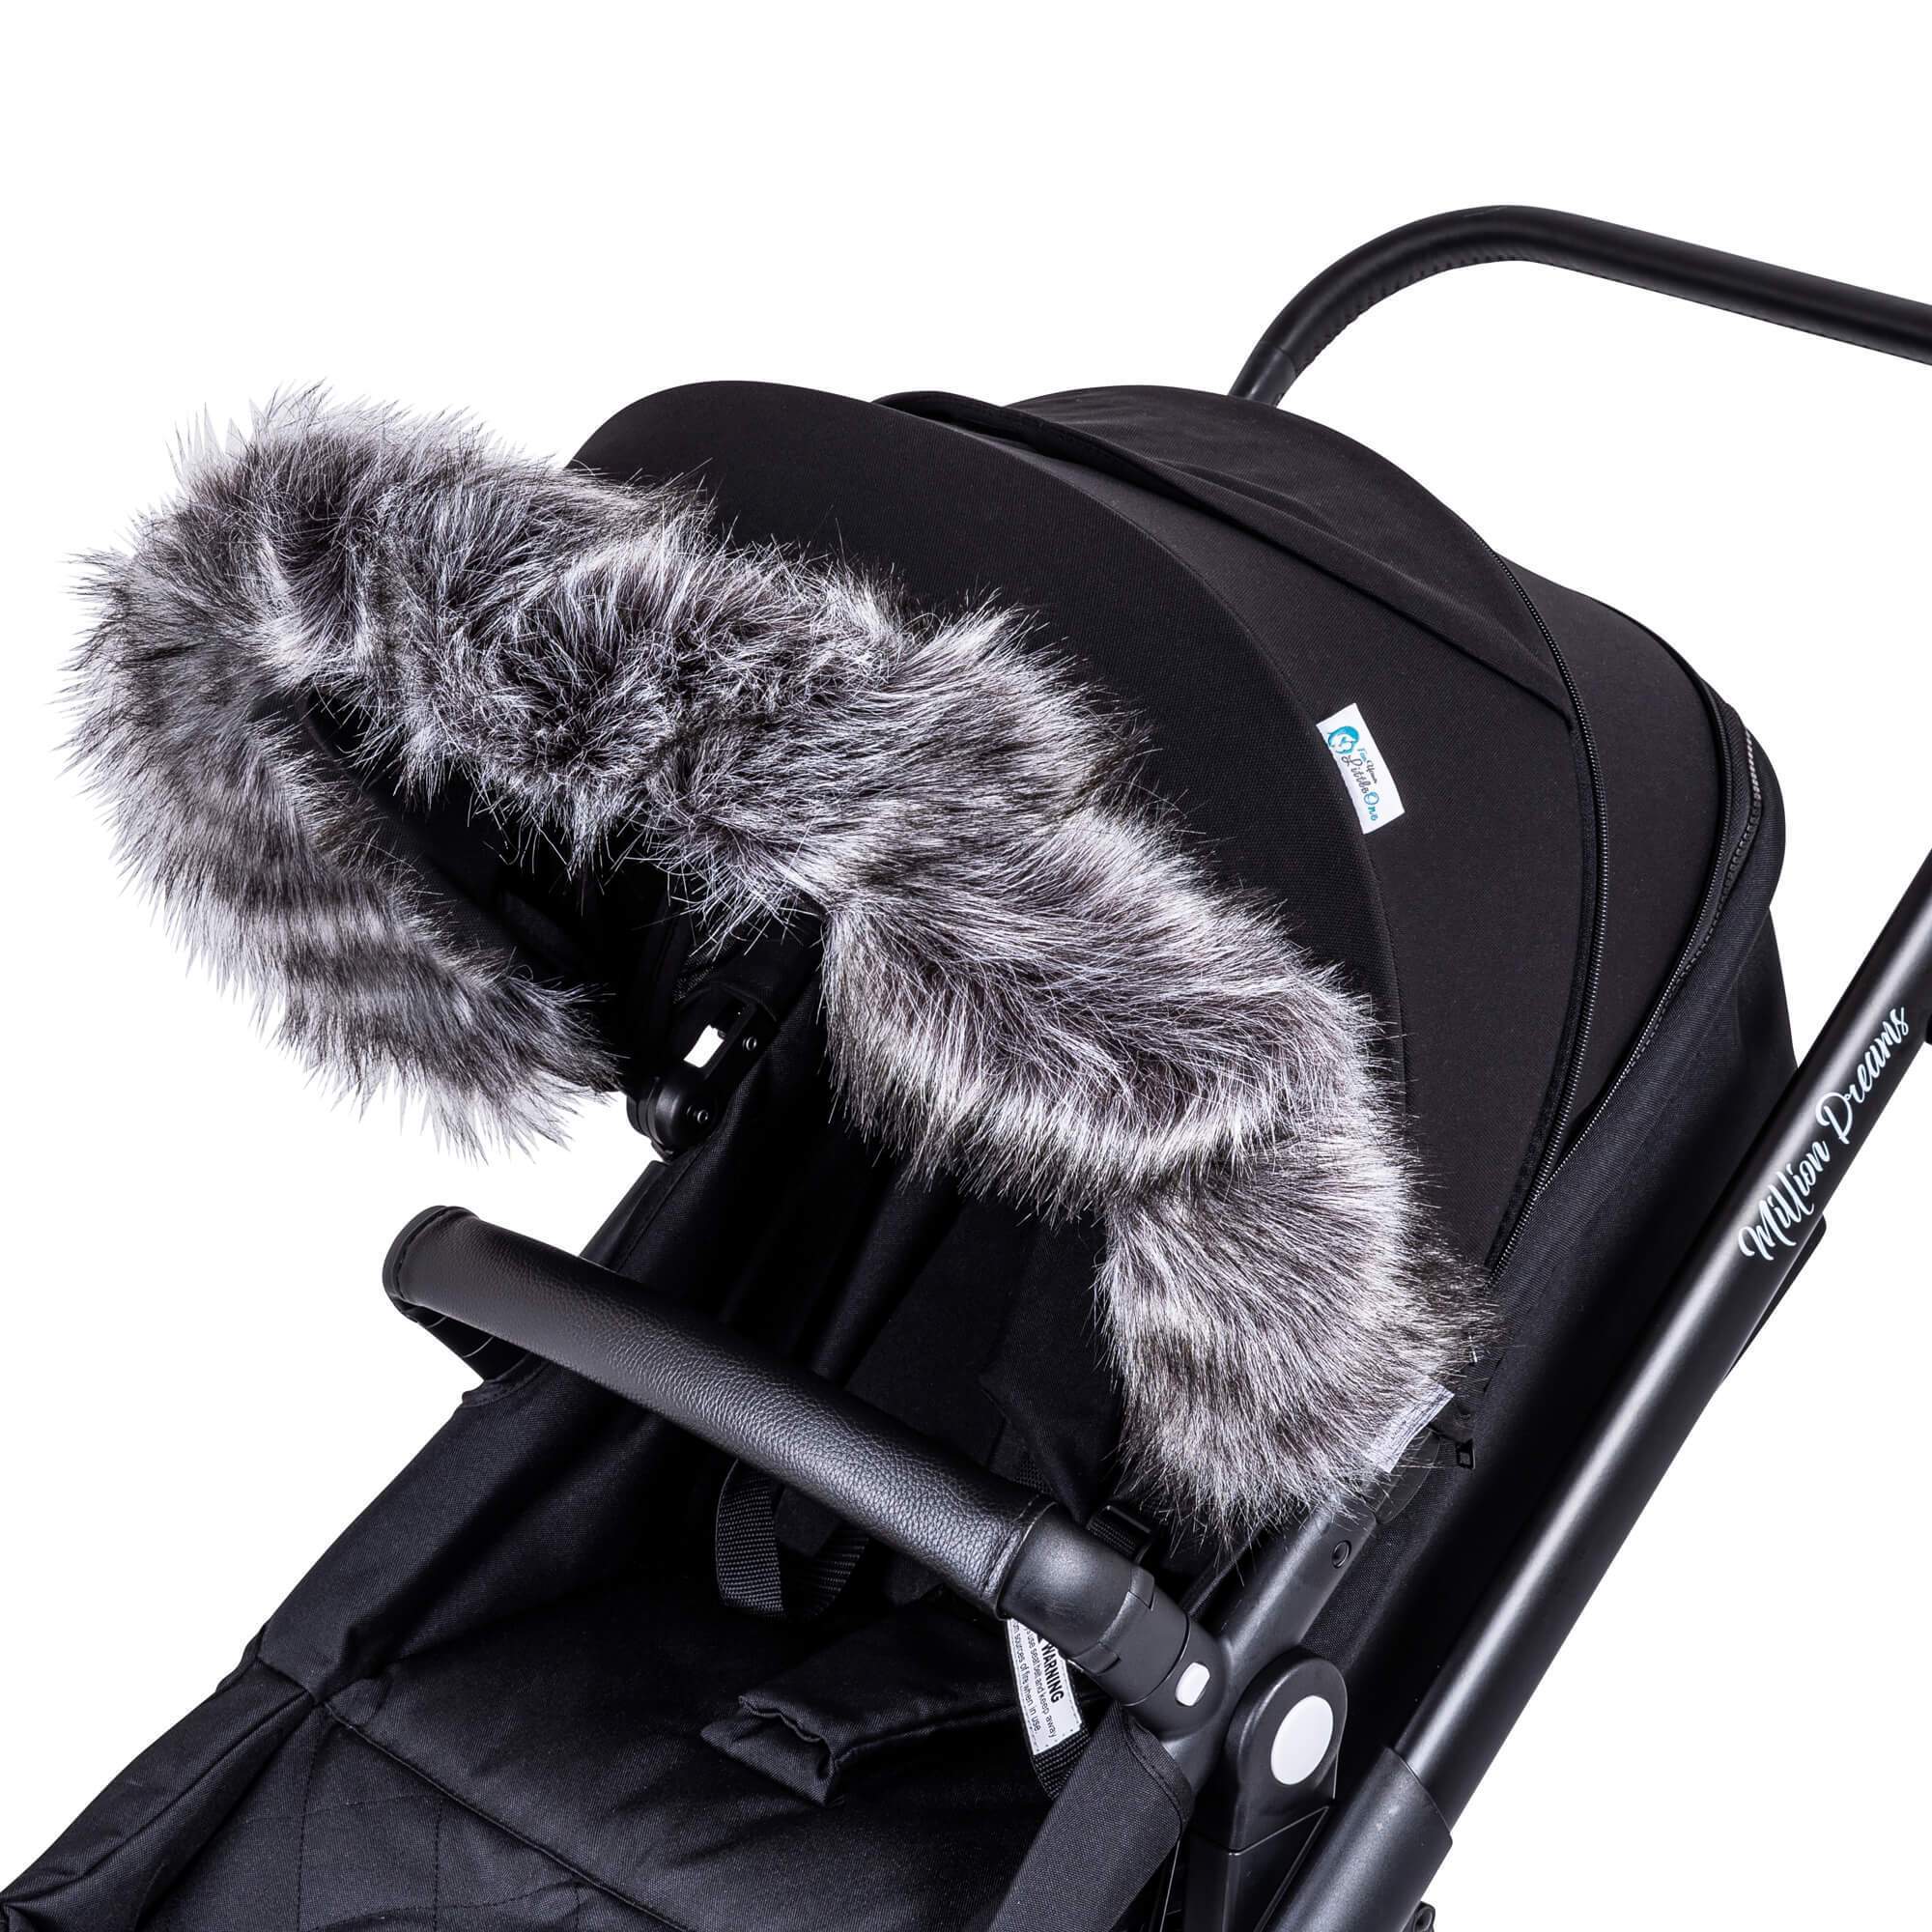 Pram Fur Hood Trim Attachment for Pushchair Compatible with Petite - For Your Little One